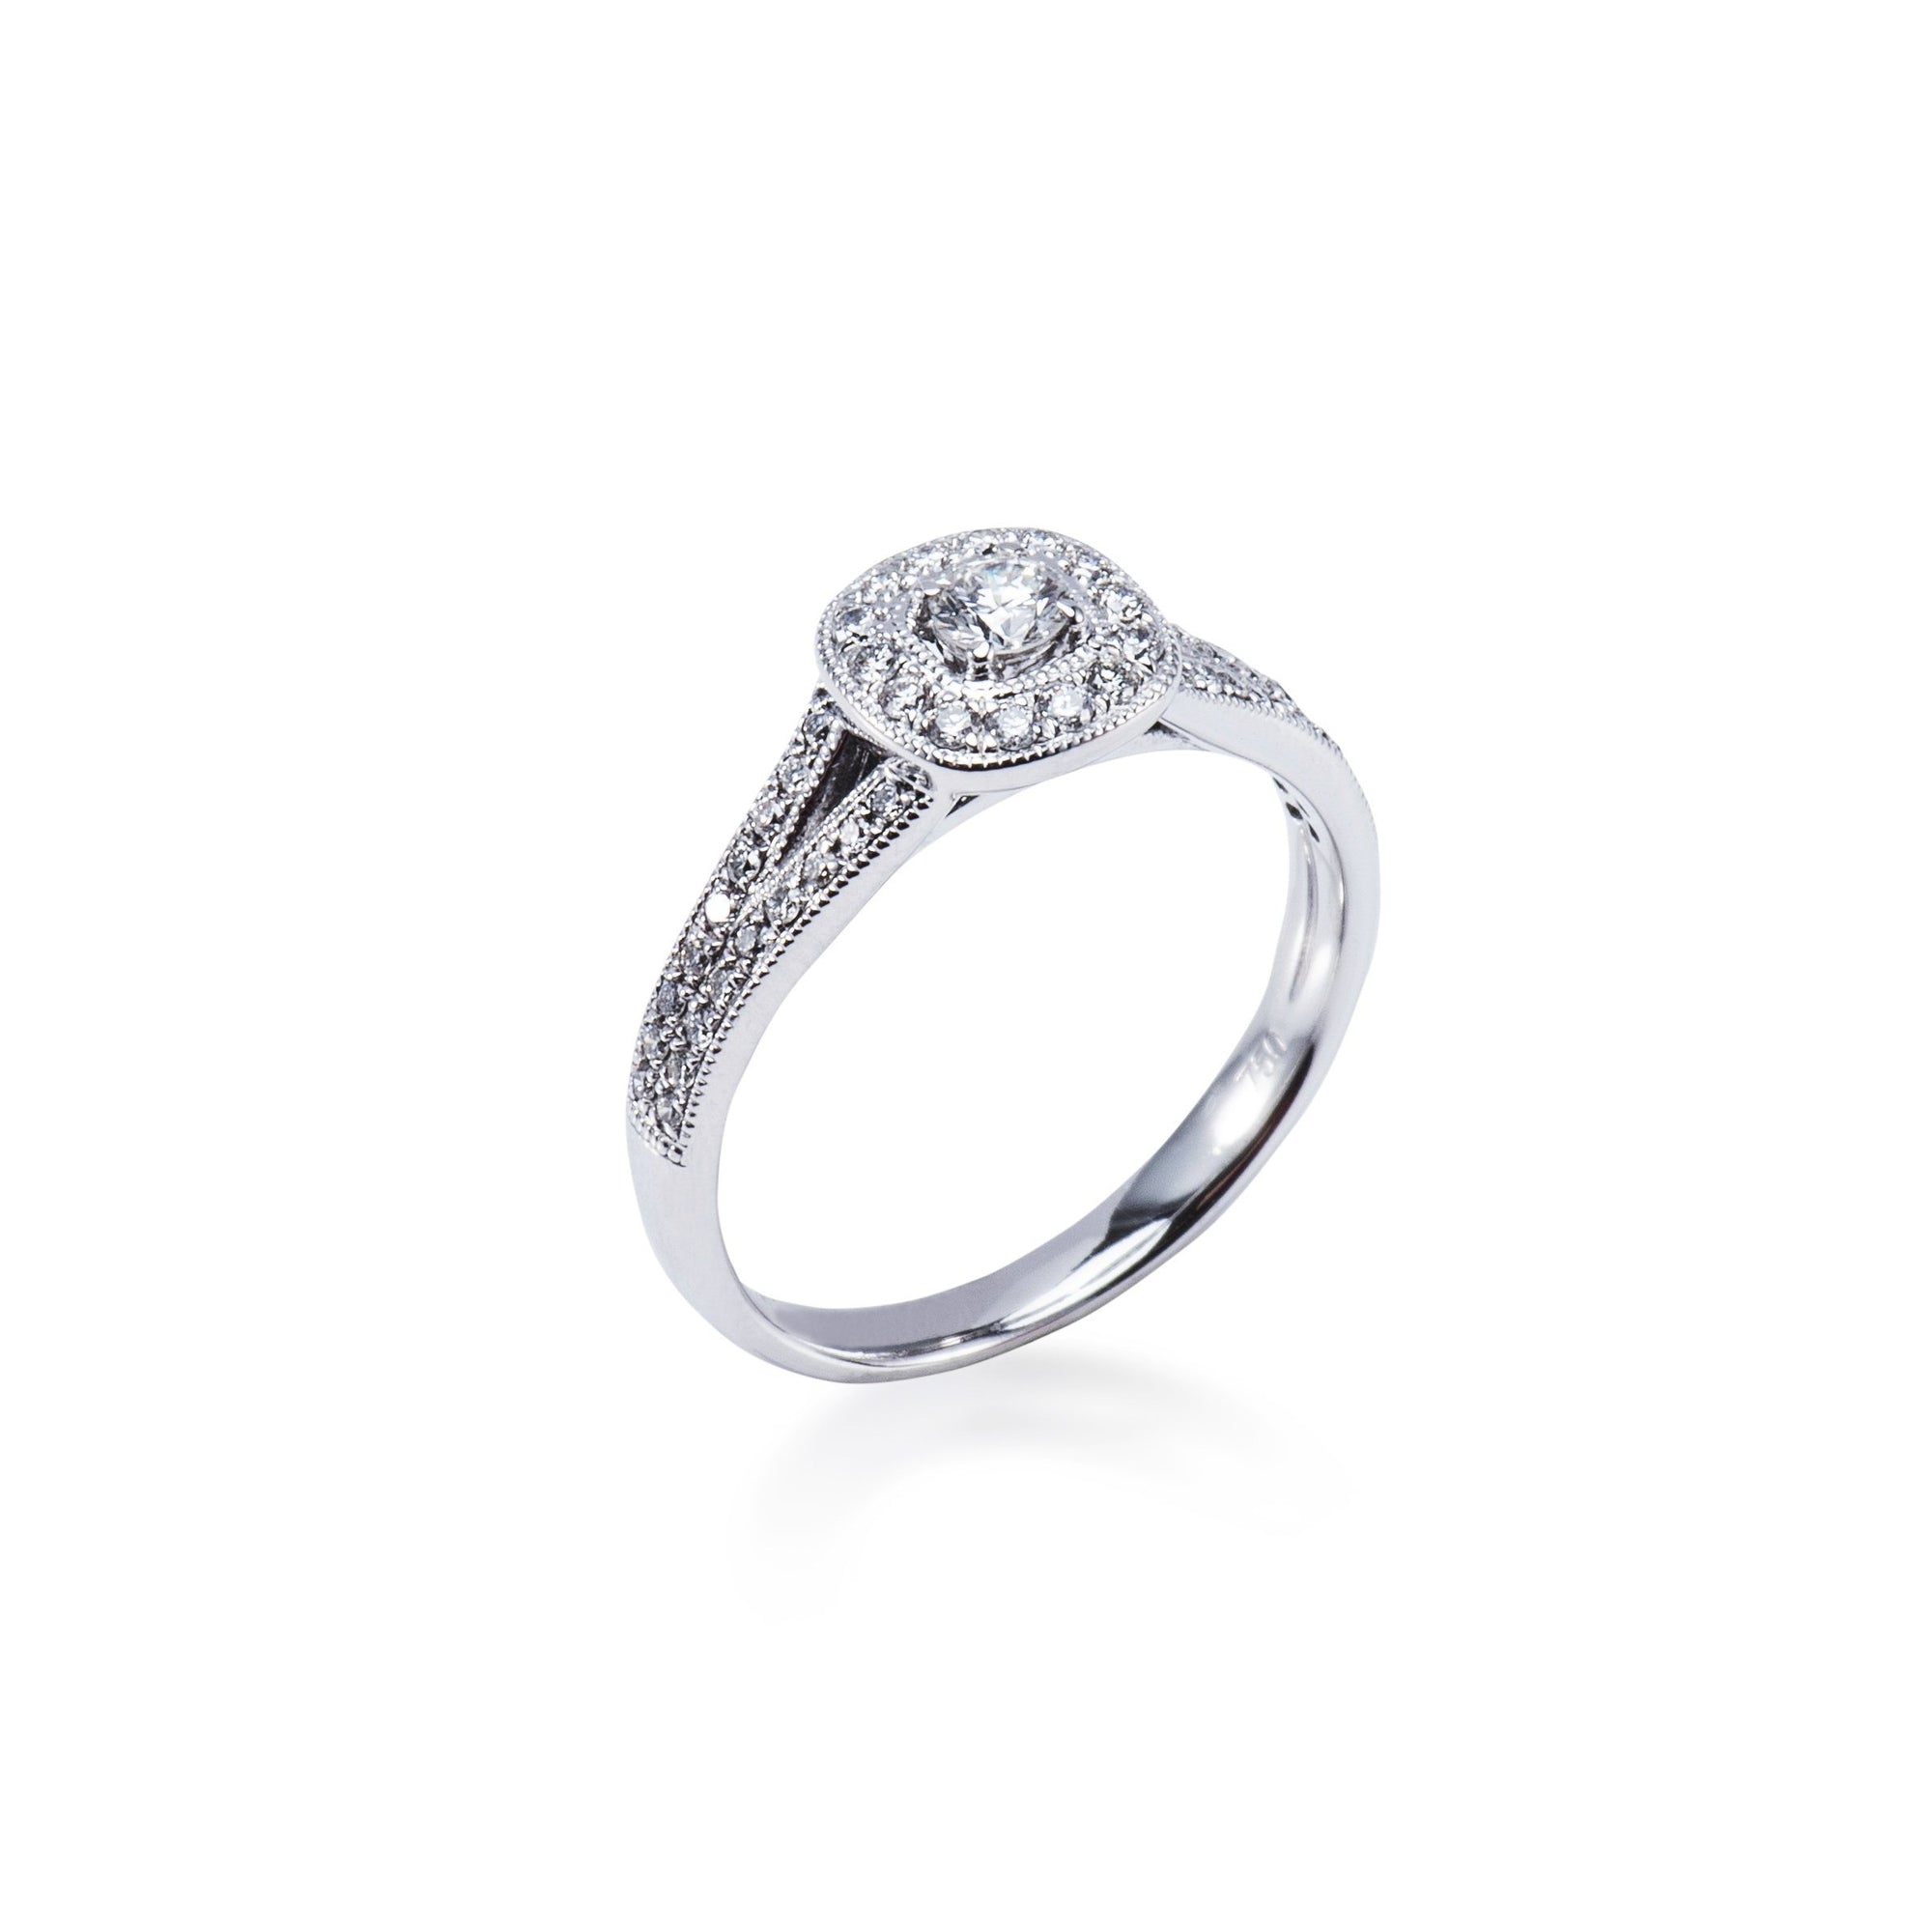 18CT WHITE GOLD HALO DIAMOND ENGAGEMENT RING Aces Jewellers 